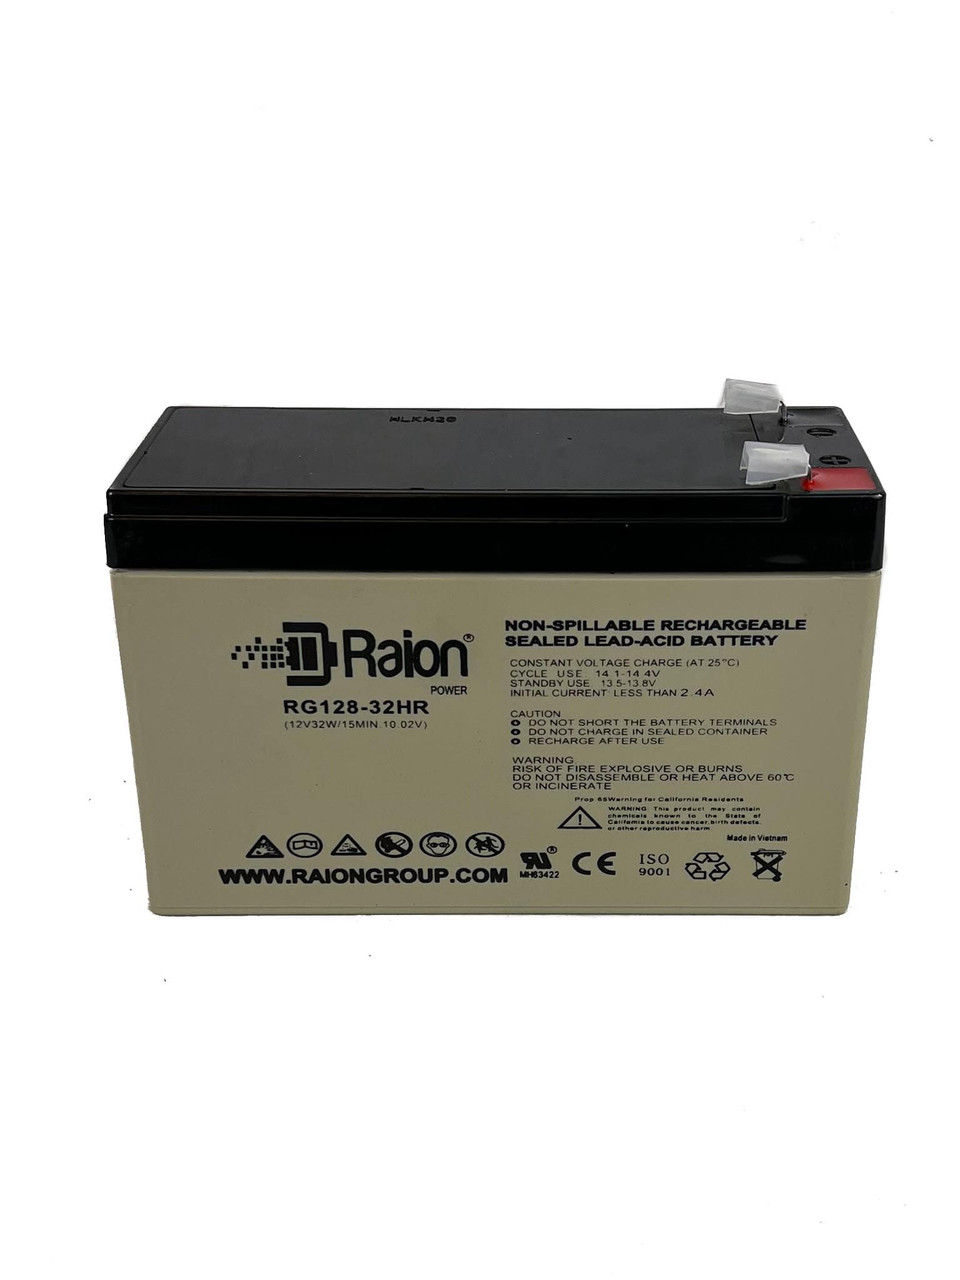 Raion Power 12V 7.5Ah 32W Rechargeable Battery for Delta HR 12-28W